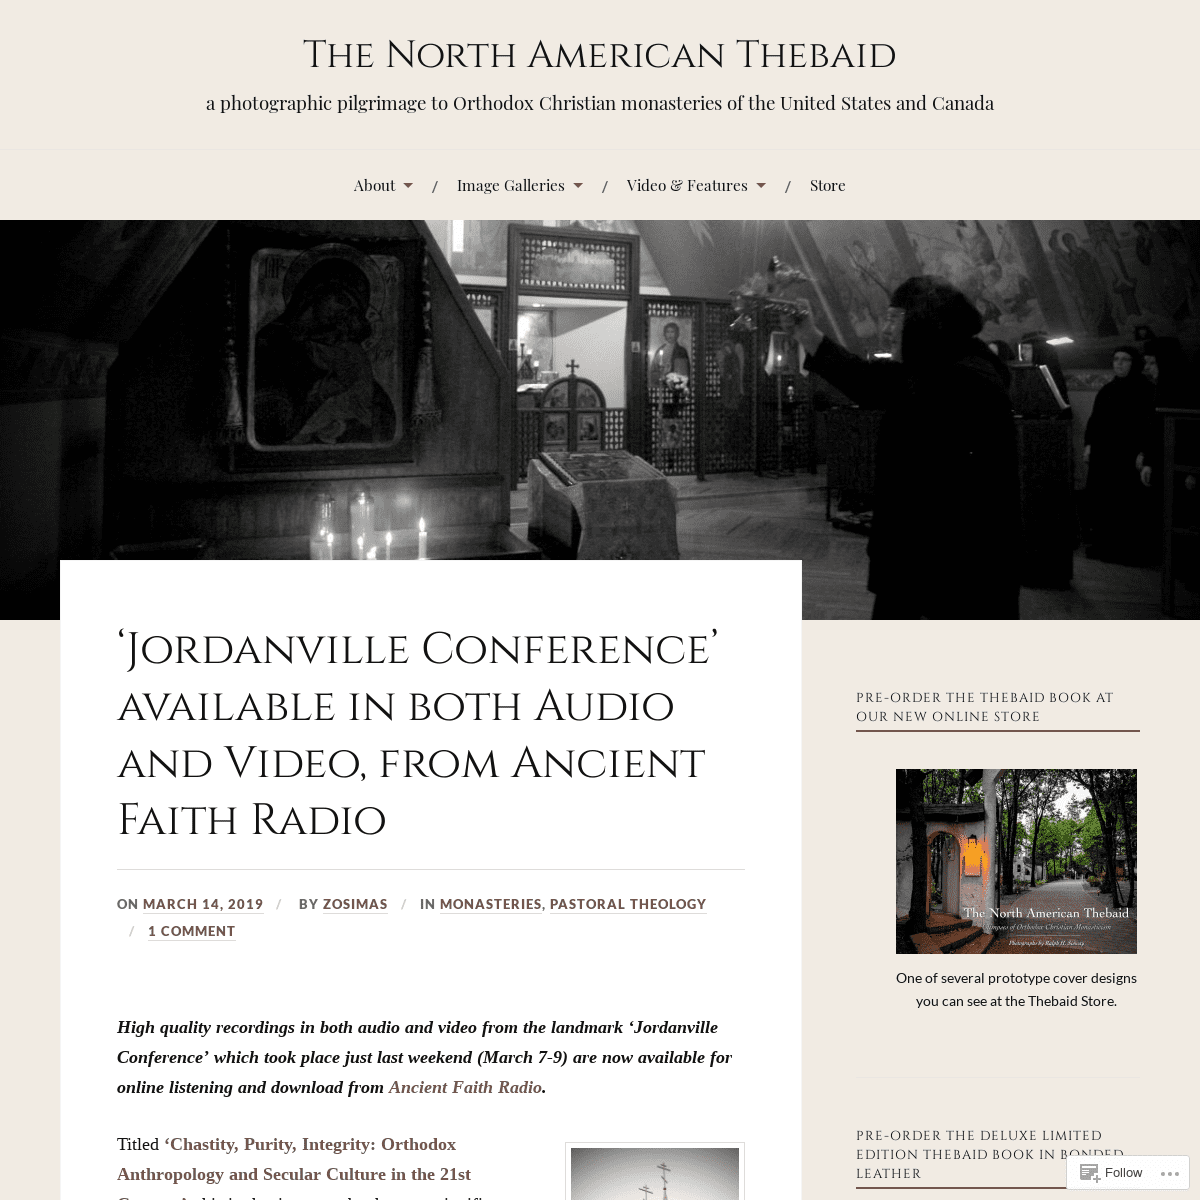 The North American Thebaid – a photographic pilgrimage to Orthodox Christian monasteries of the United States and Canada